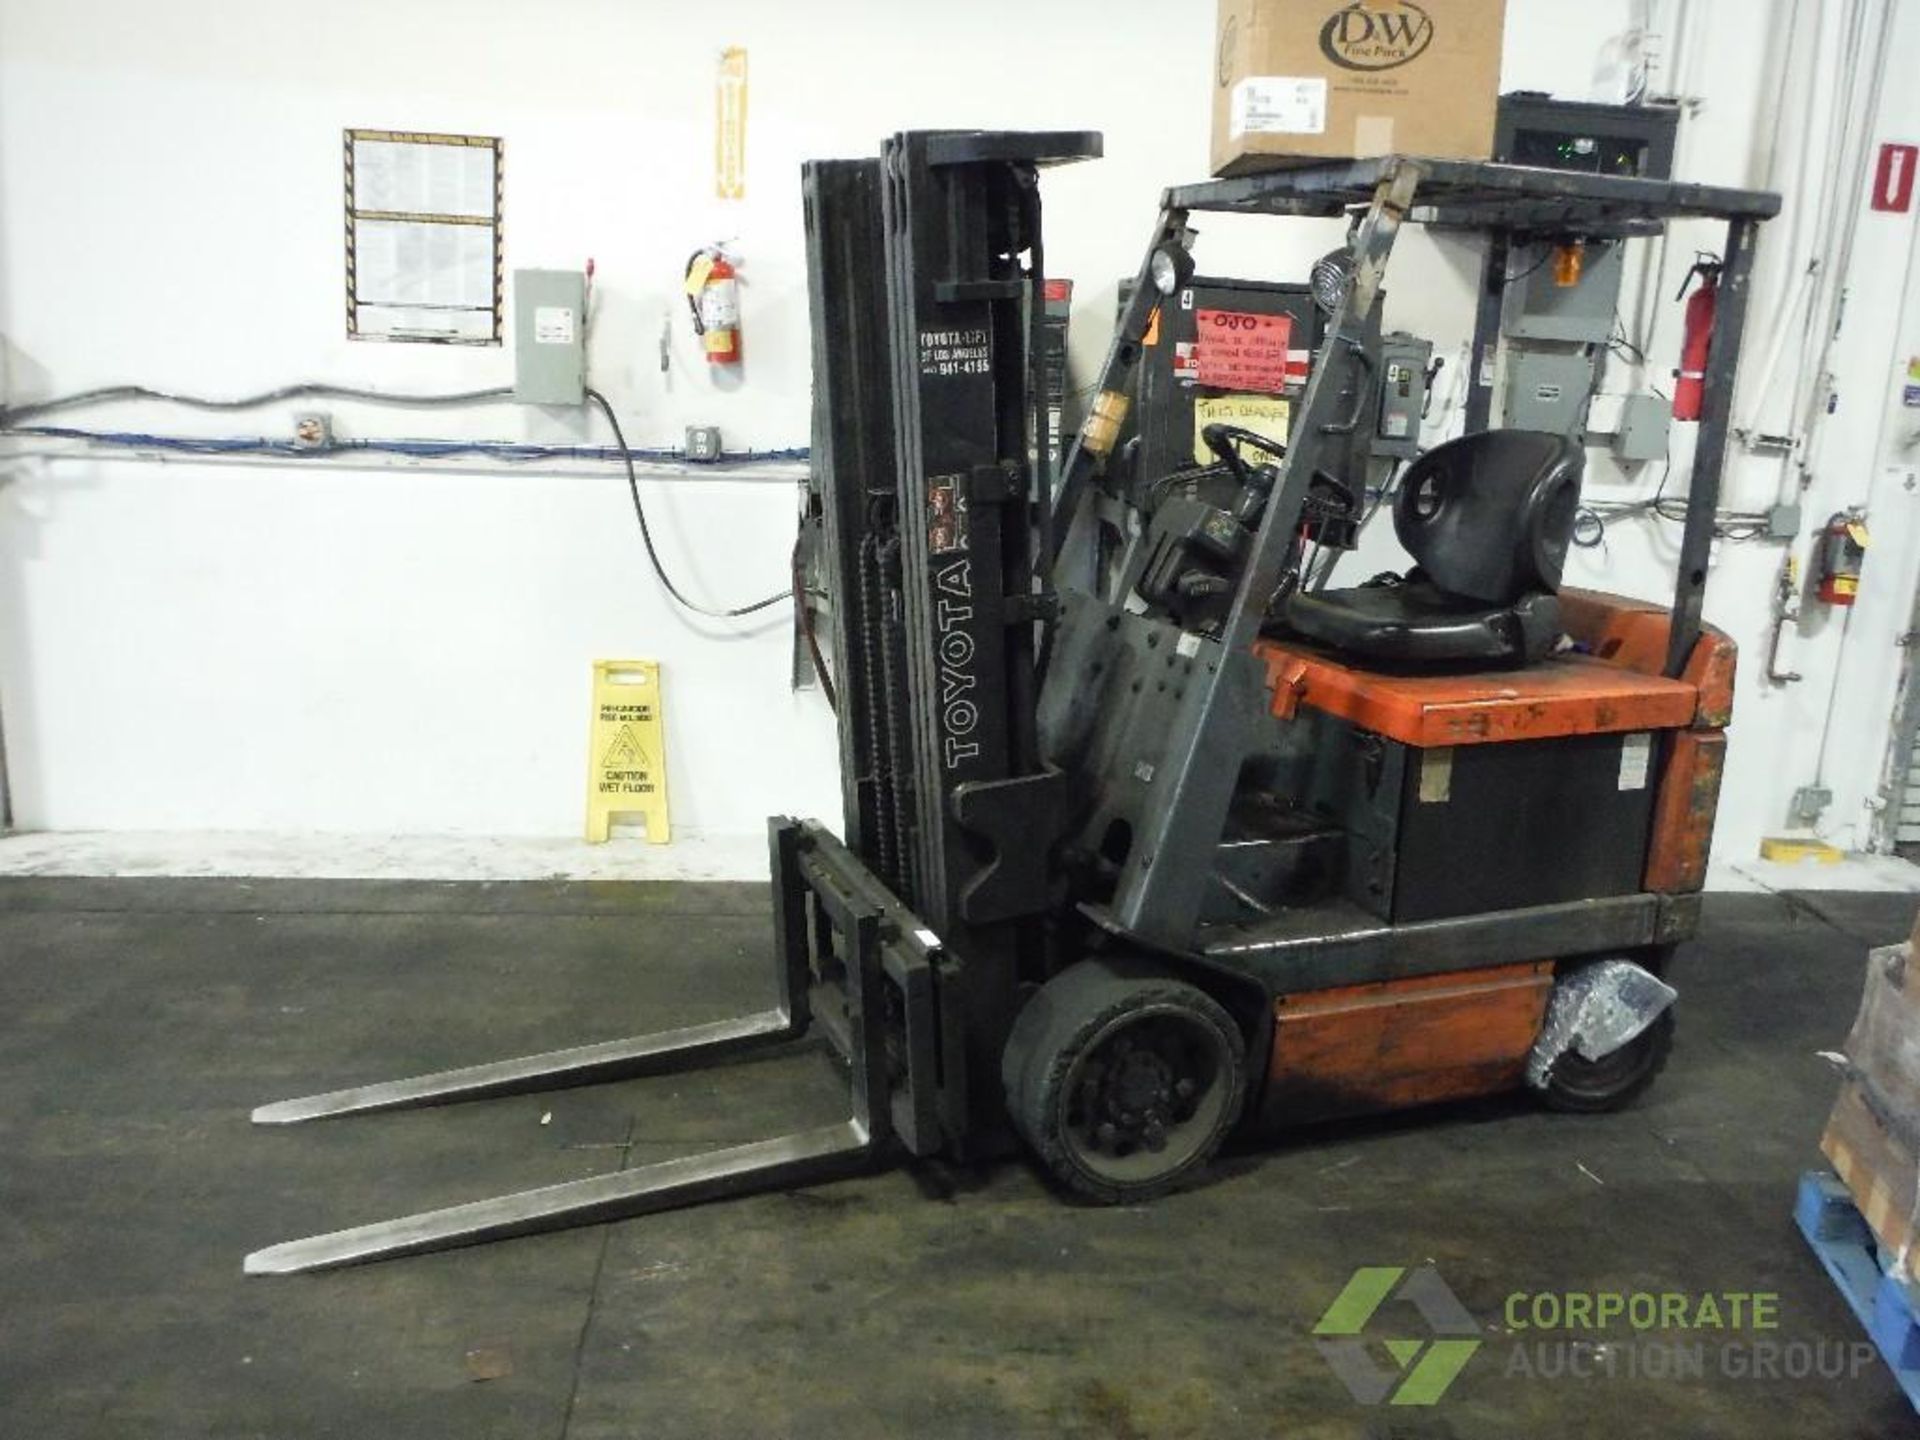 Toyota 48 volt electric fork lift, Model 5FBCU25, SN 63202, 4500 lb. capacity, 3 stage mast, 188 in.